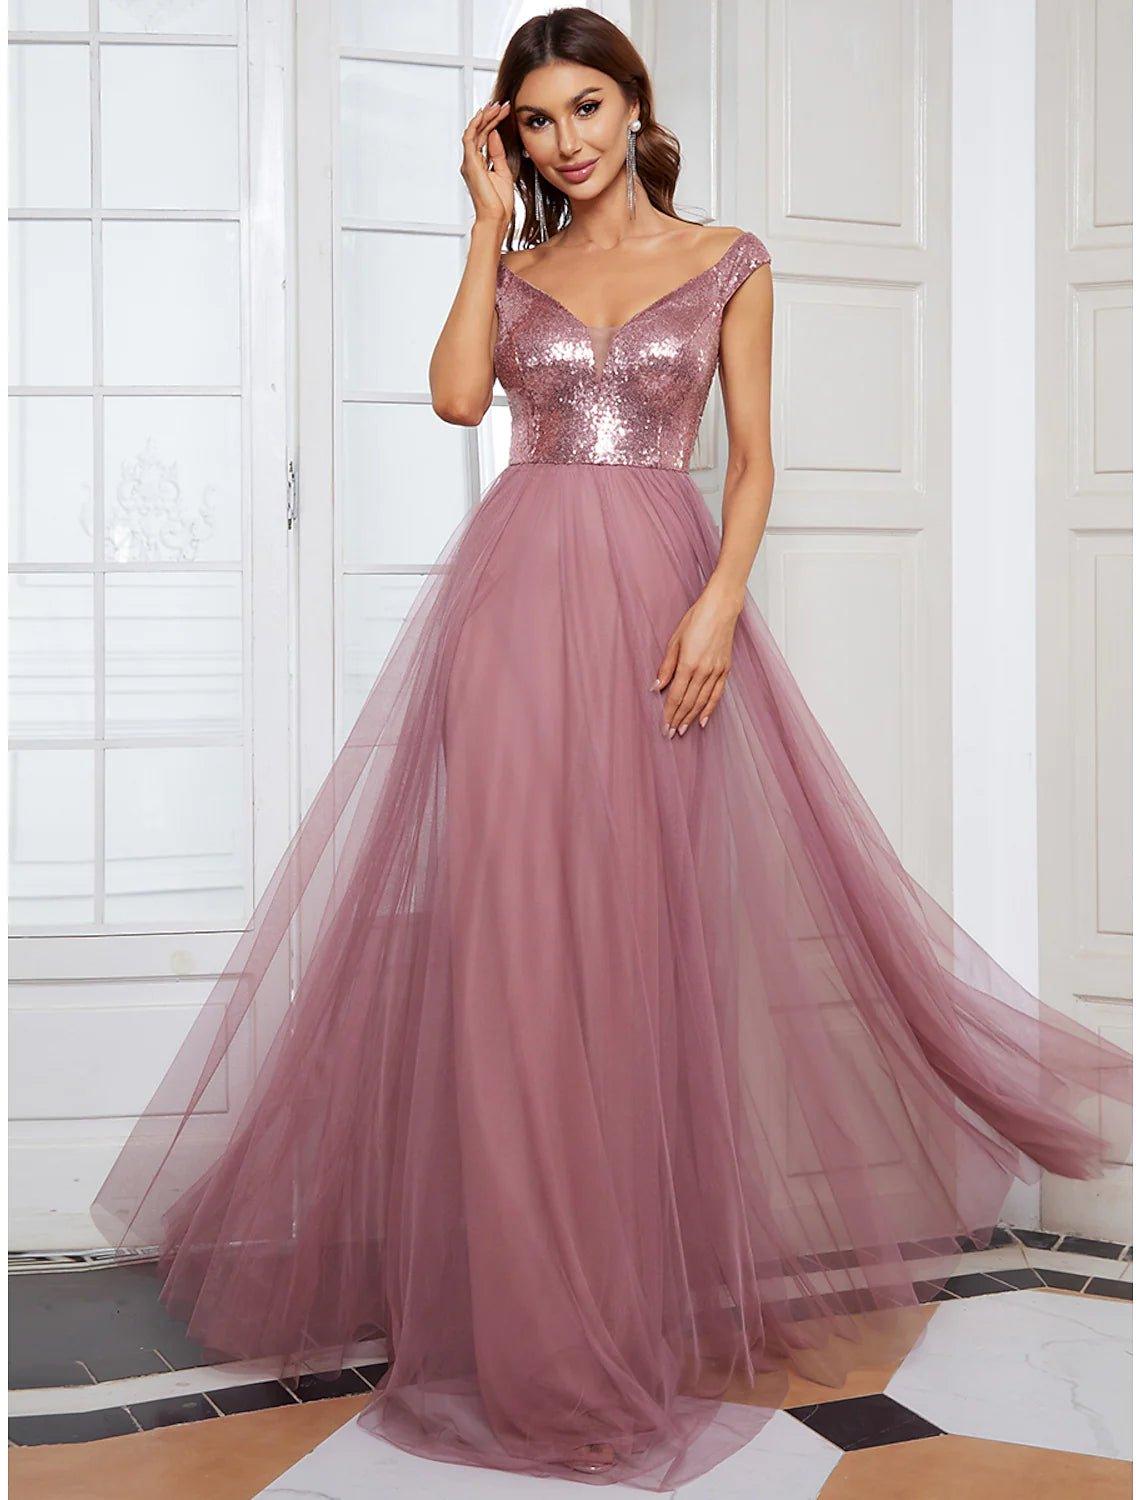 Bridesmaid Dress V Neck Sleeveless Elegant Floor Length Tulle / Sequined with Draping / Tier / Solid Color - RongMoon